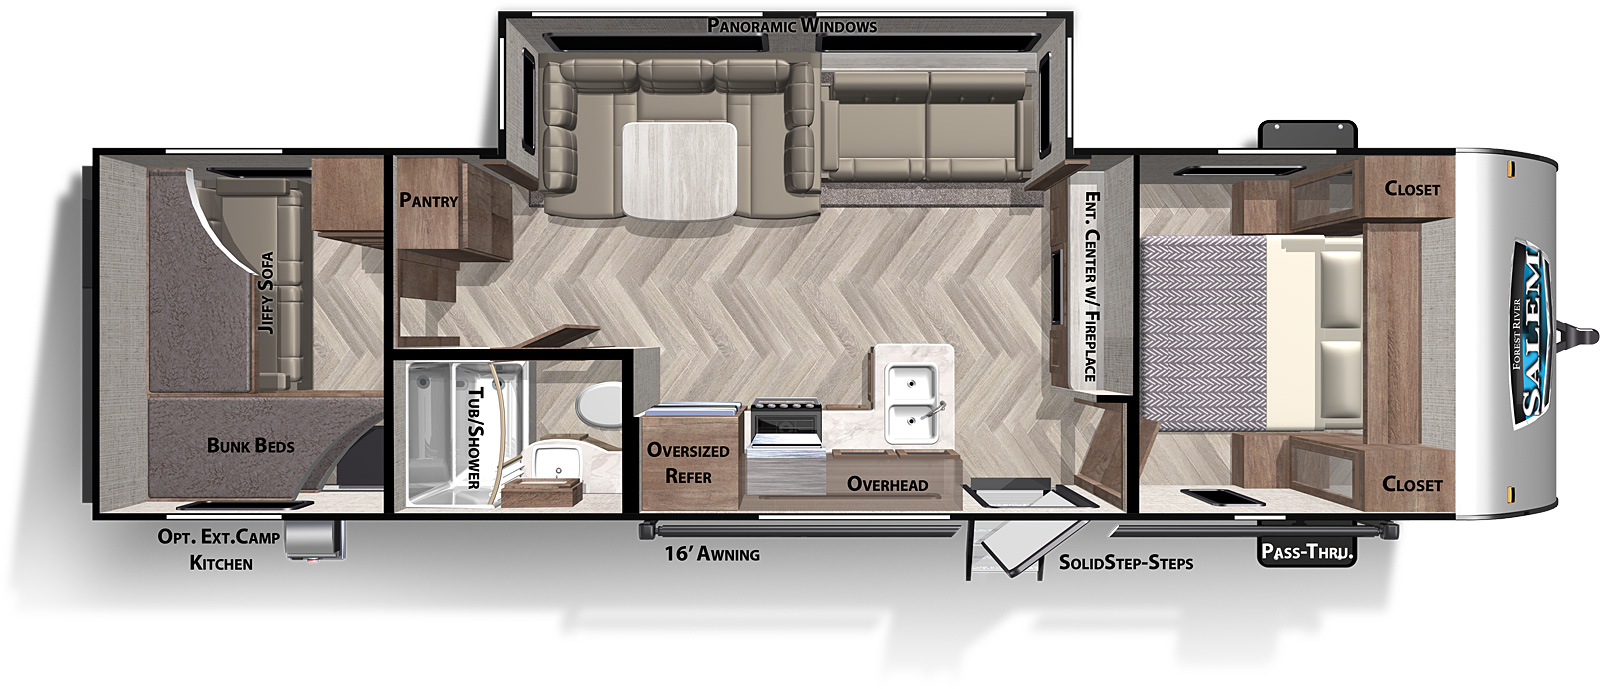 Cruise Lite Northwest 273QBXL floorplan. The 273QBXL has one slide out and one entry door.